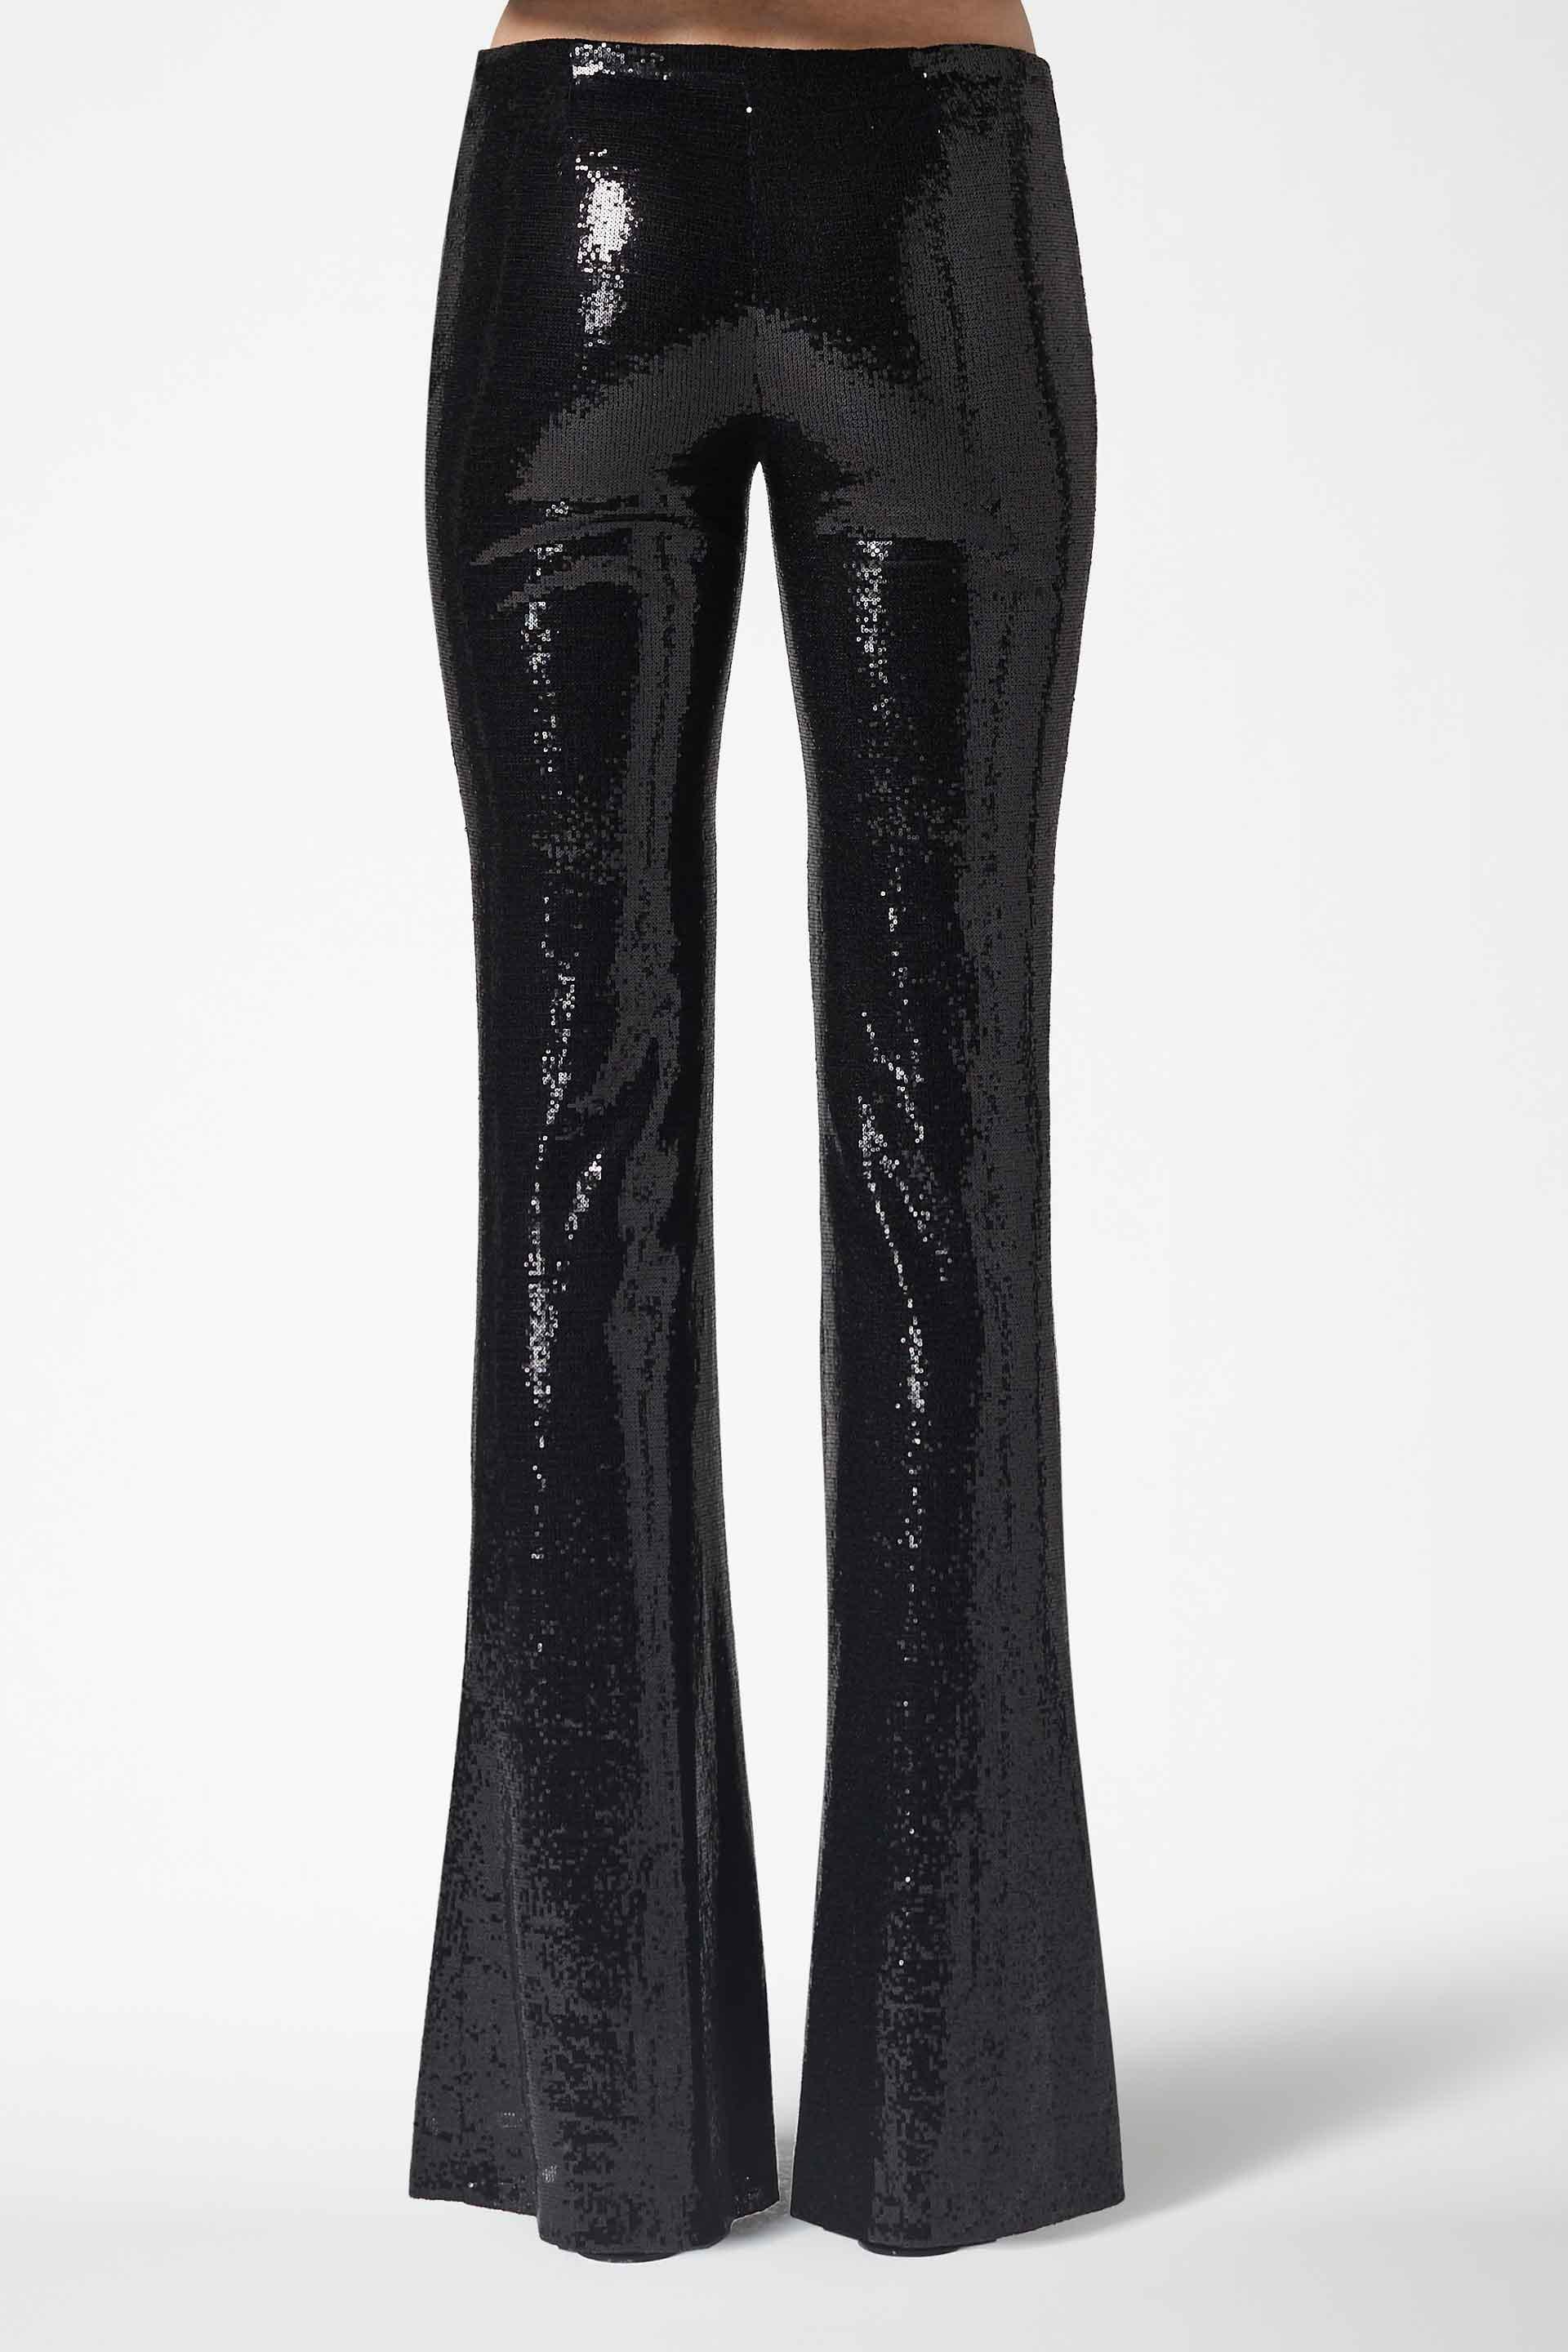 Galvan London Satin Galaxy Flared Sequin Trousers in Black - Lyst